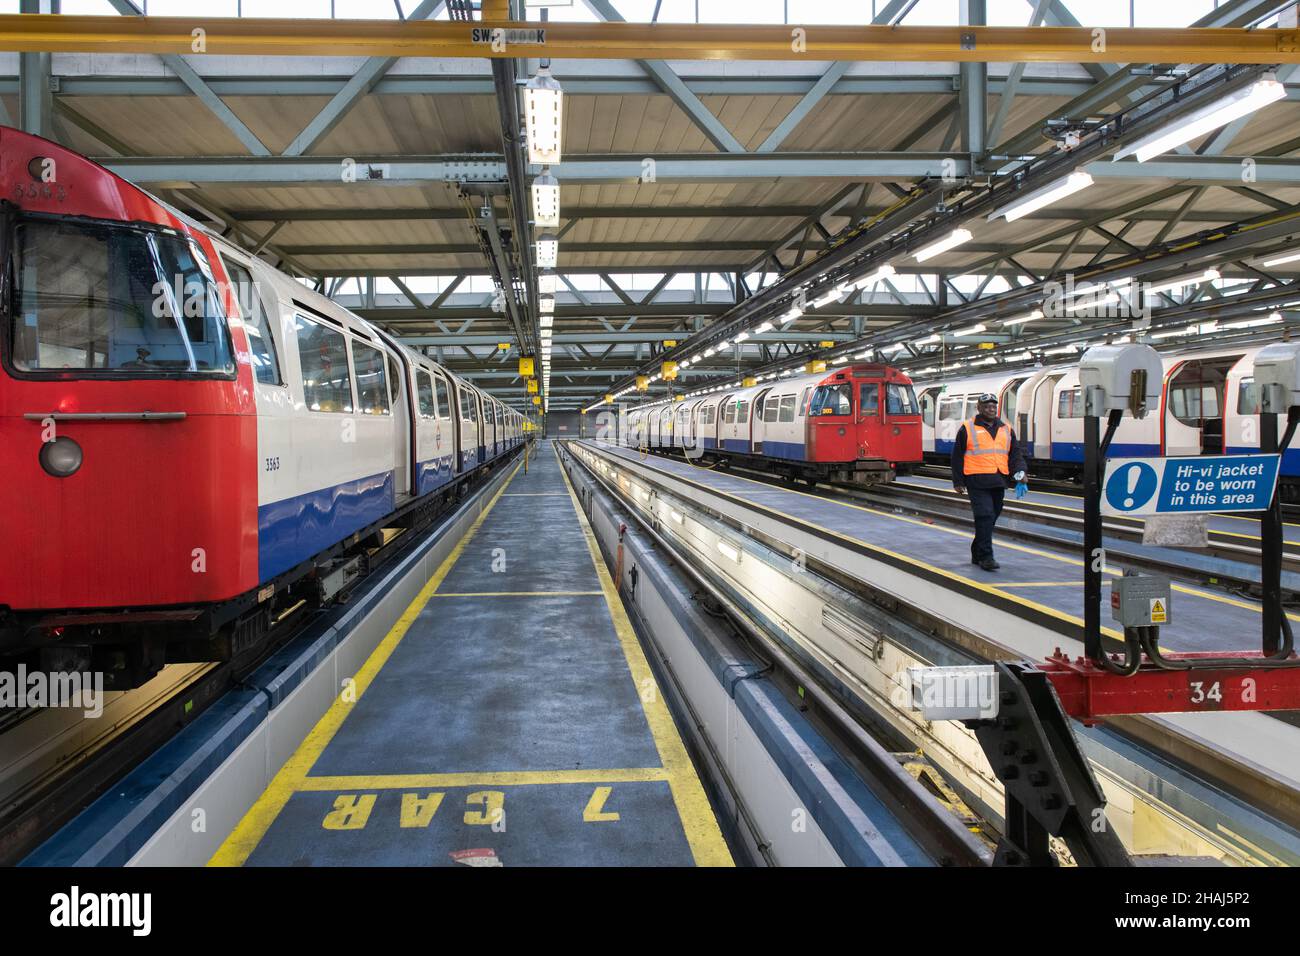 Bakerloo Line trains being maintained at Stonebridge Park Depot.  The Bakerloo line fleet comprises 36 trains of 1972 Tube Stock which had a nominal d Stock Photo